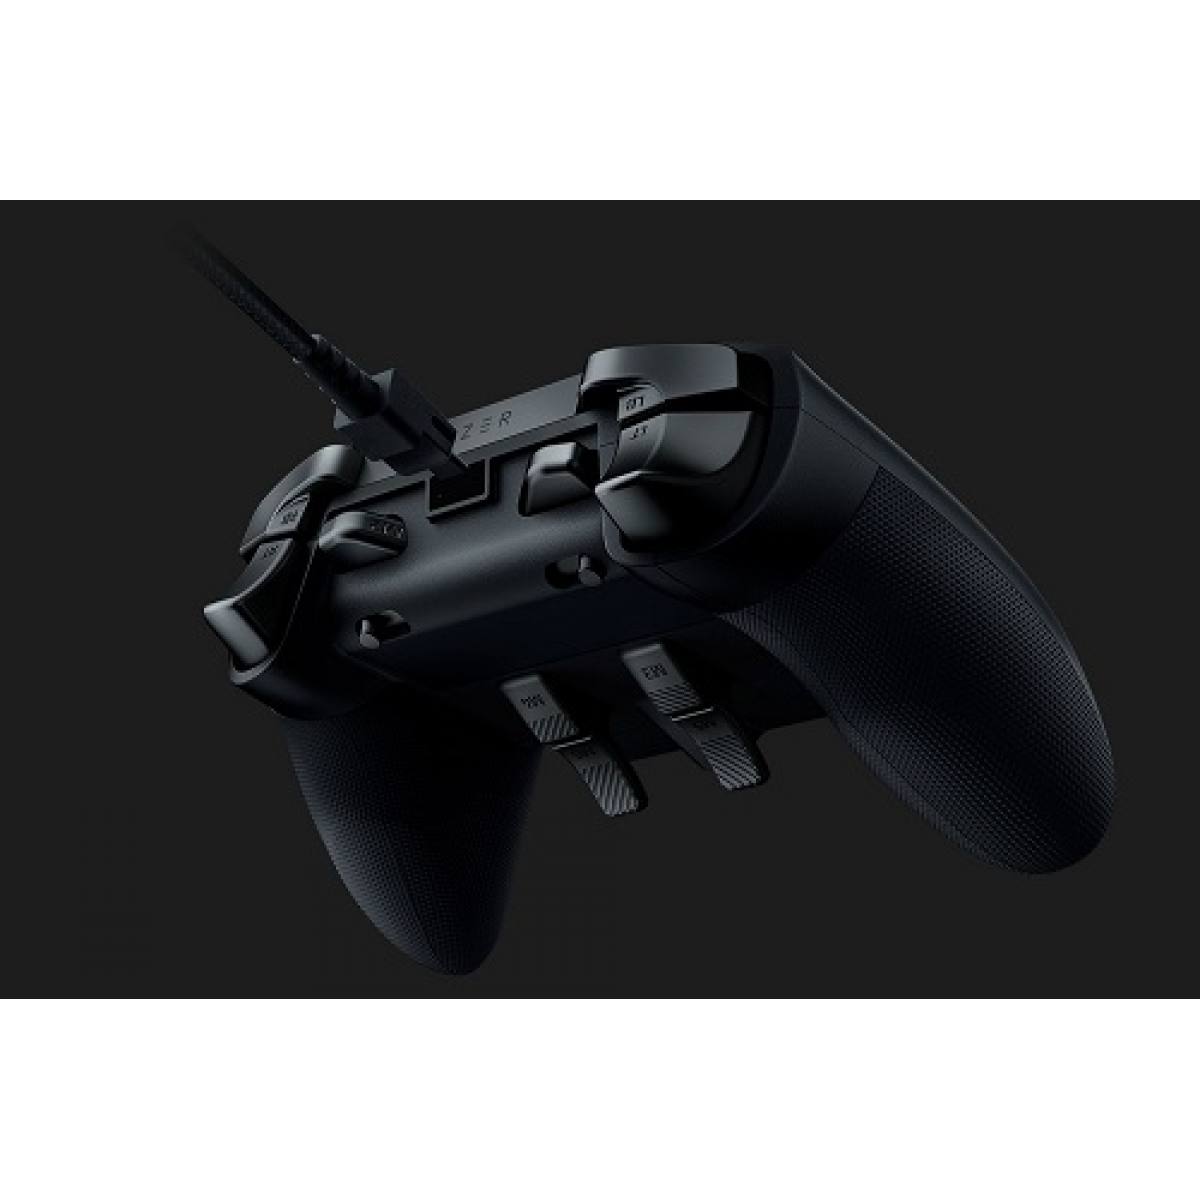 Razer Wolverine Ultimate Gaming Controller for Xbox One 